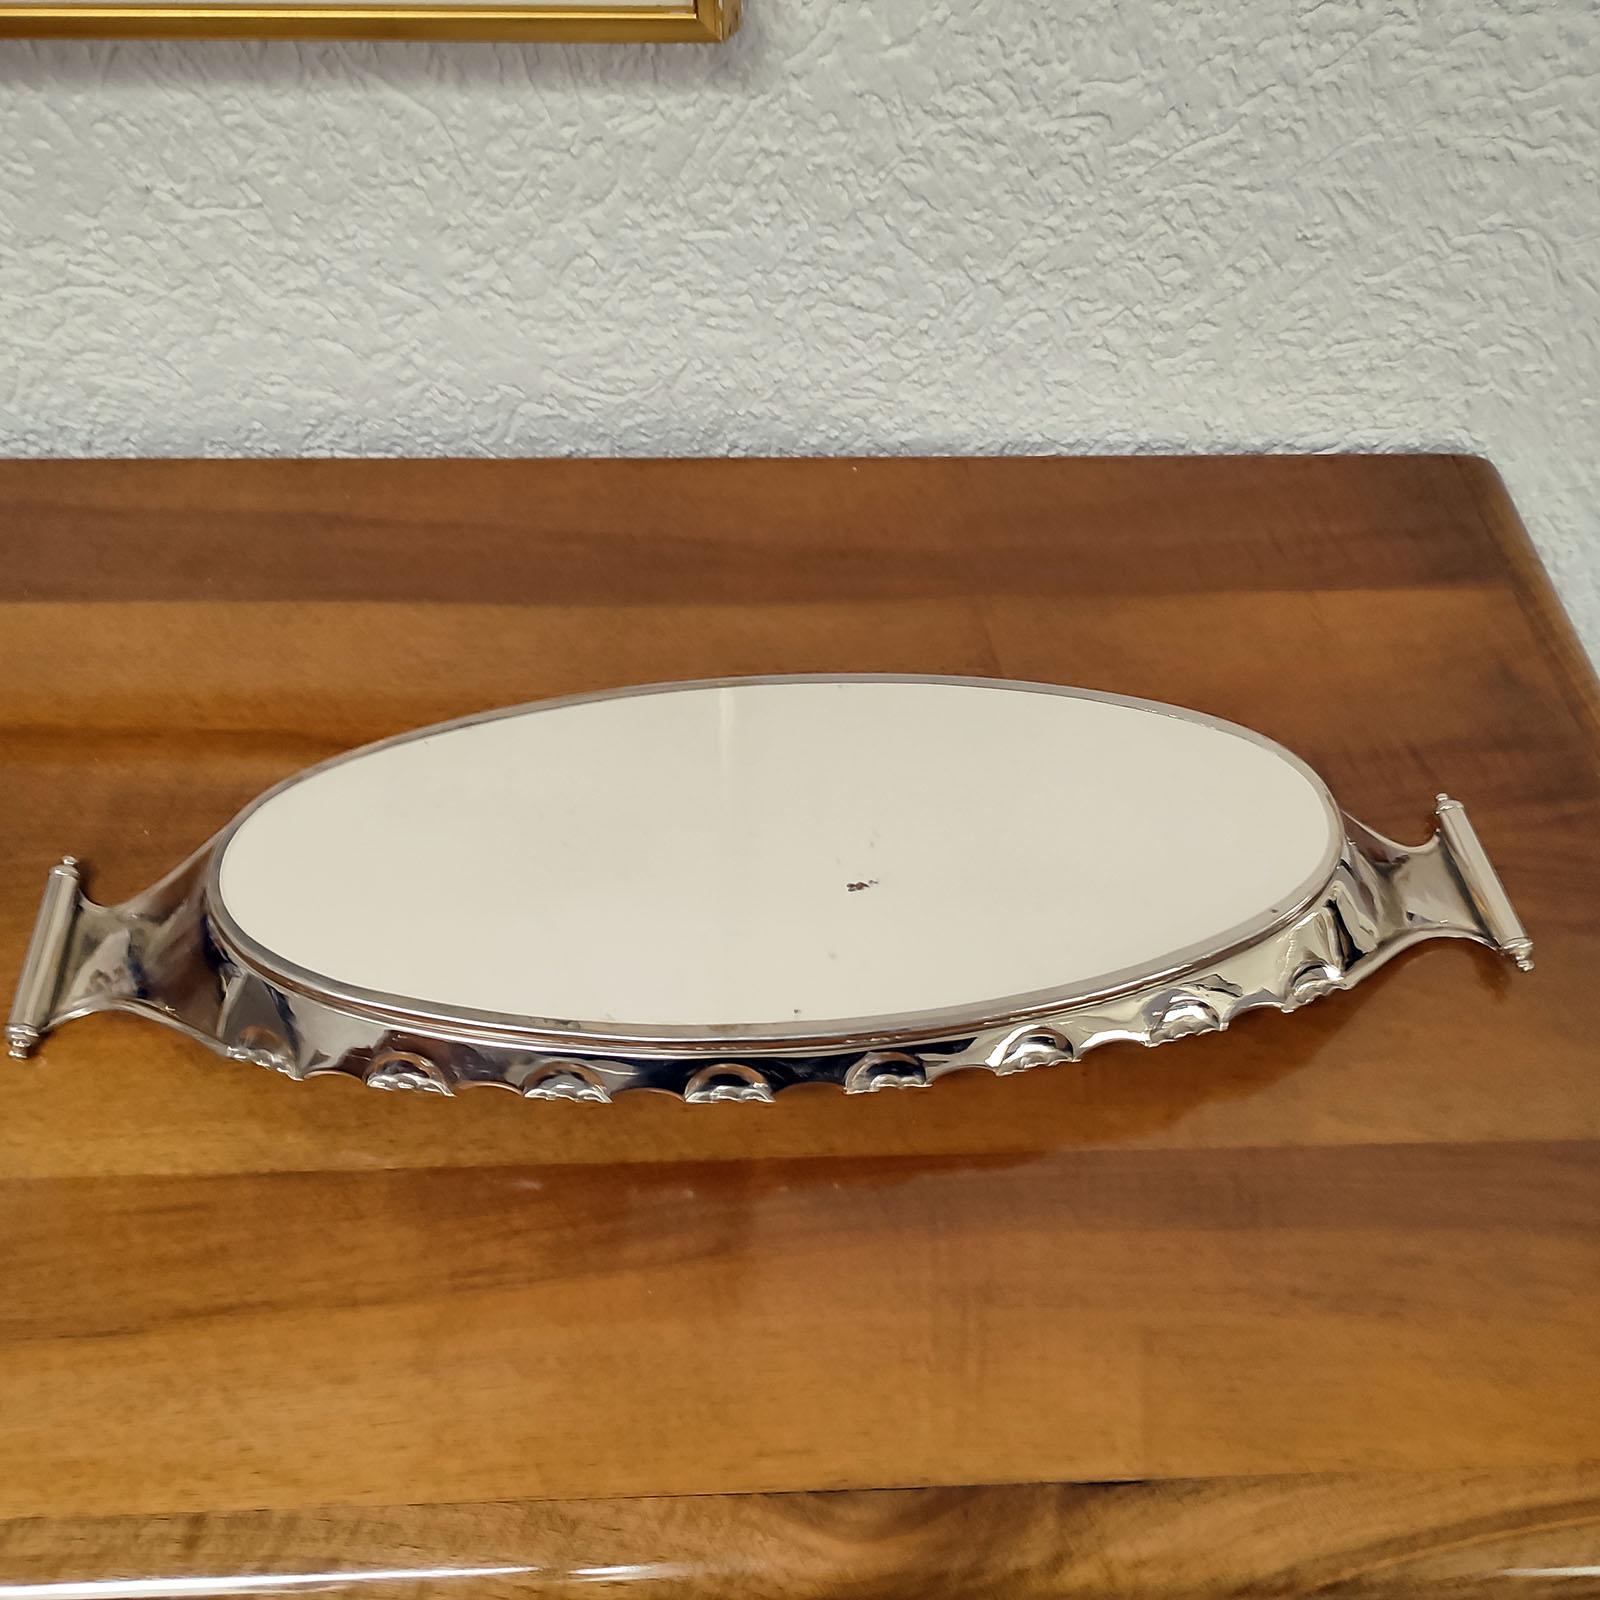 Art Nouveau Villeroy & Boch Silver Plated Serving Tray, circa 1900 For Sale 5